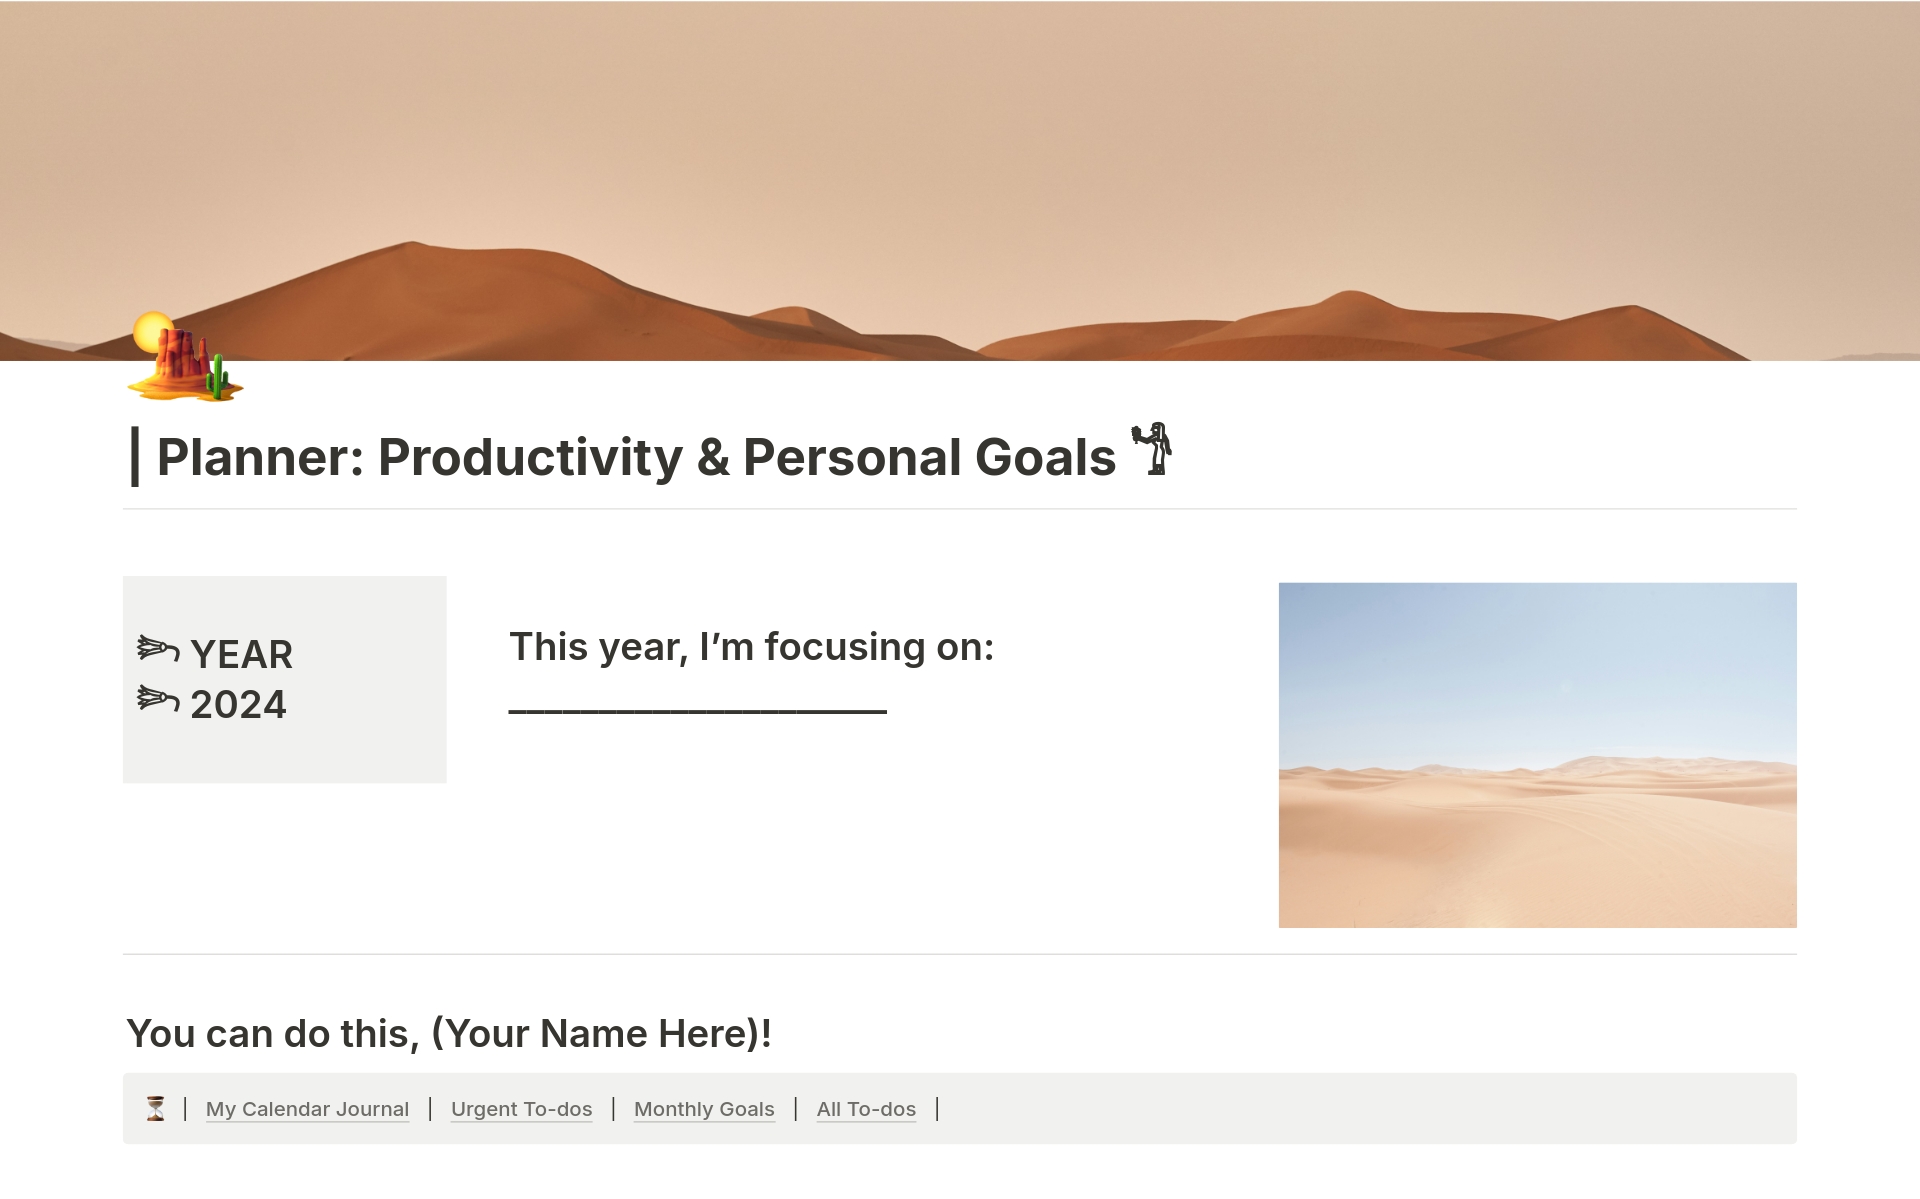 🙂 Use this Notion yearly planner template to organise and keep track of your daily to-dos + personal goals! Productivity Planner. Personal Goals Planner.